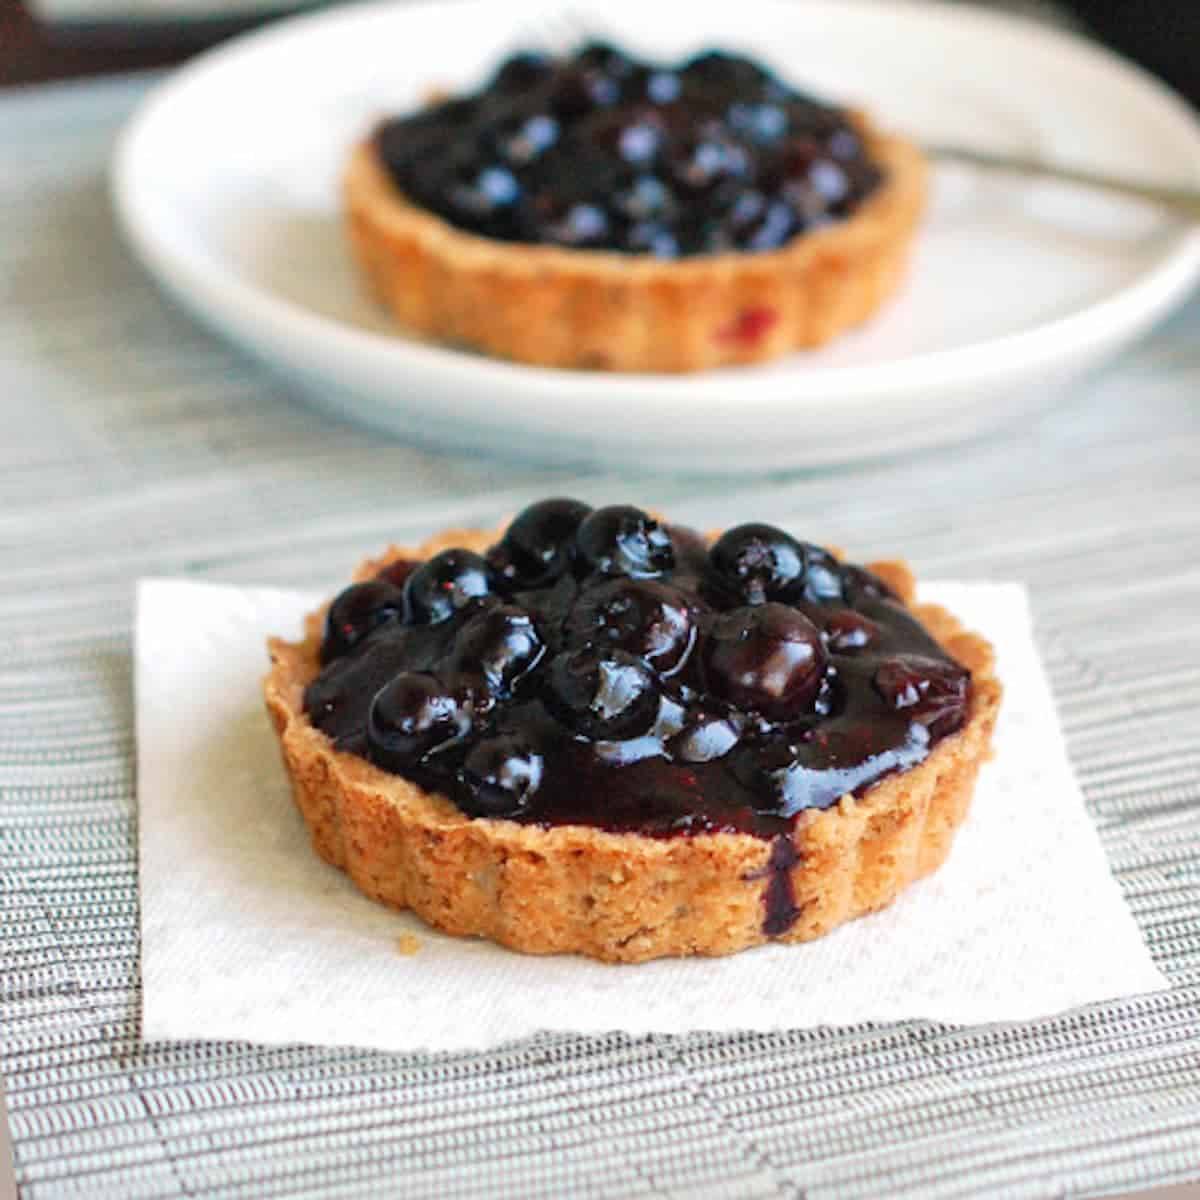 Two blueberry tarts with homemade crust and packed full of fresh blueberry filling.